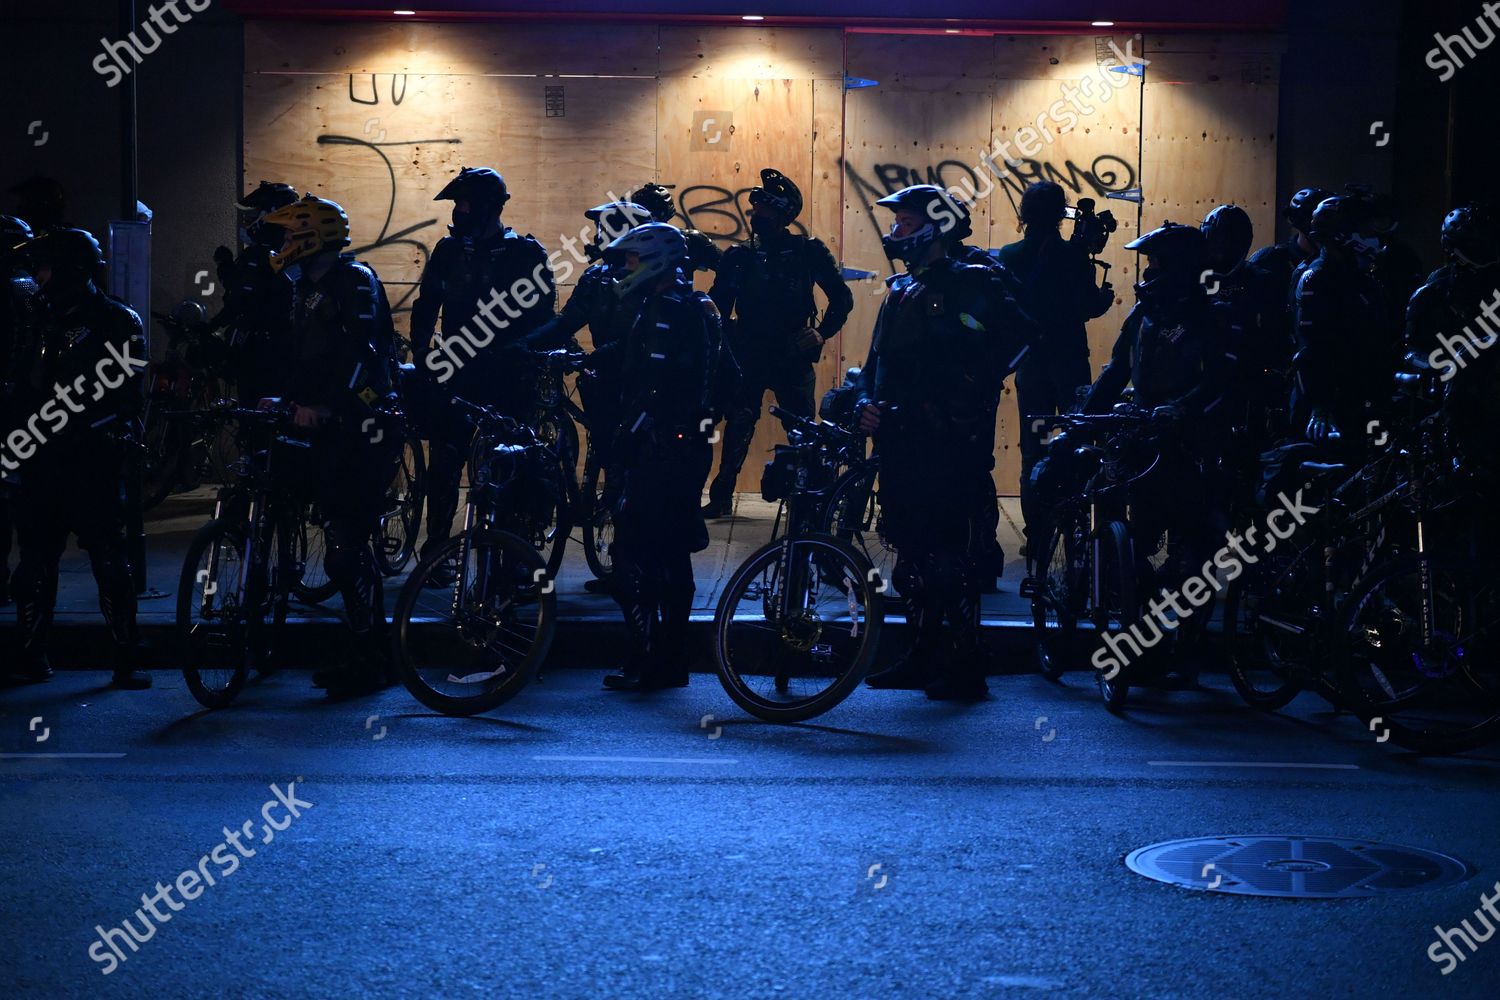 Nypd Police Officers On Street During We Editorial Stock Photo Stock Image Shutterstock